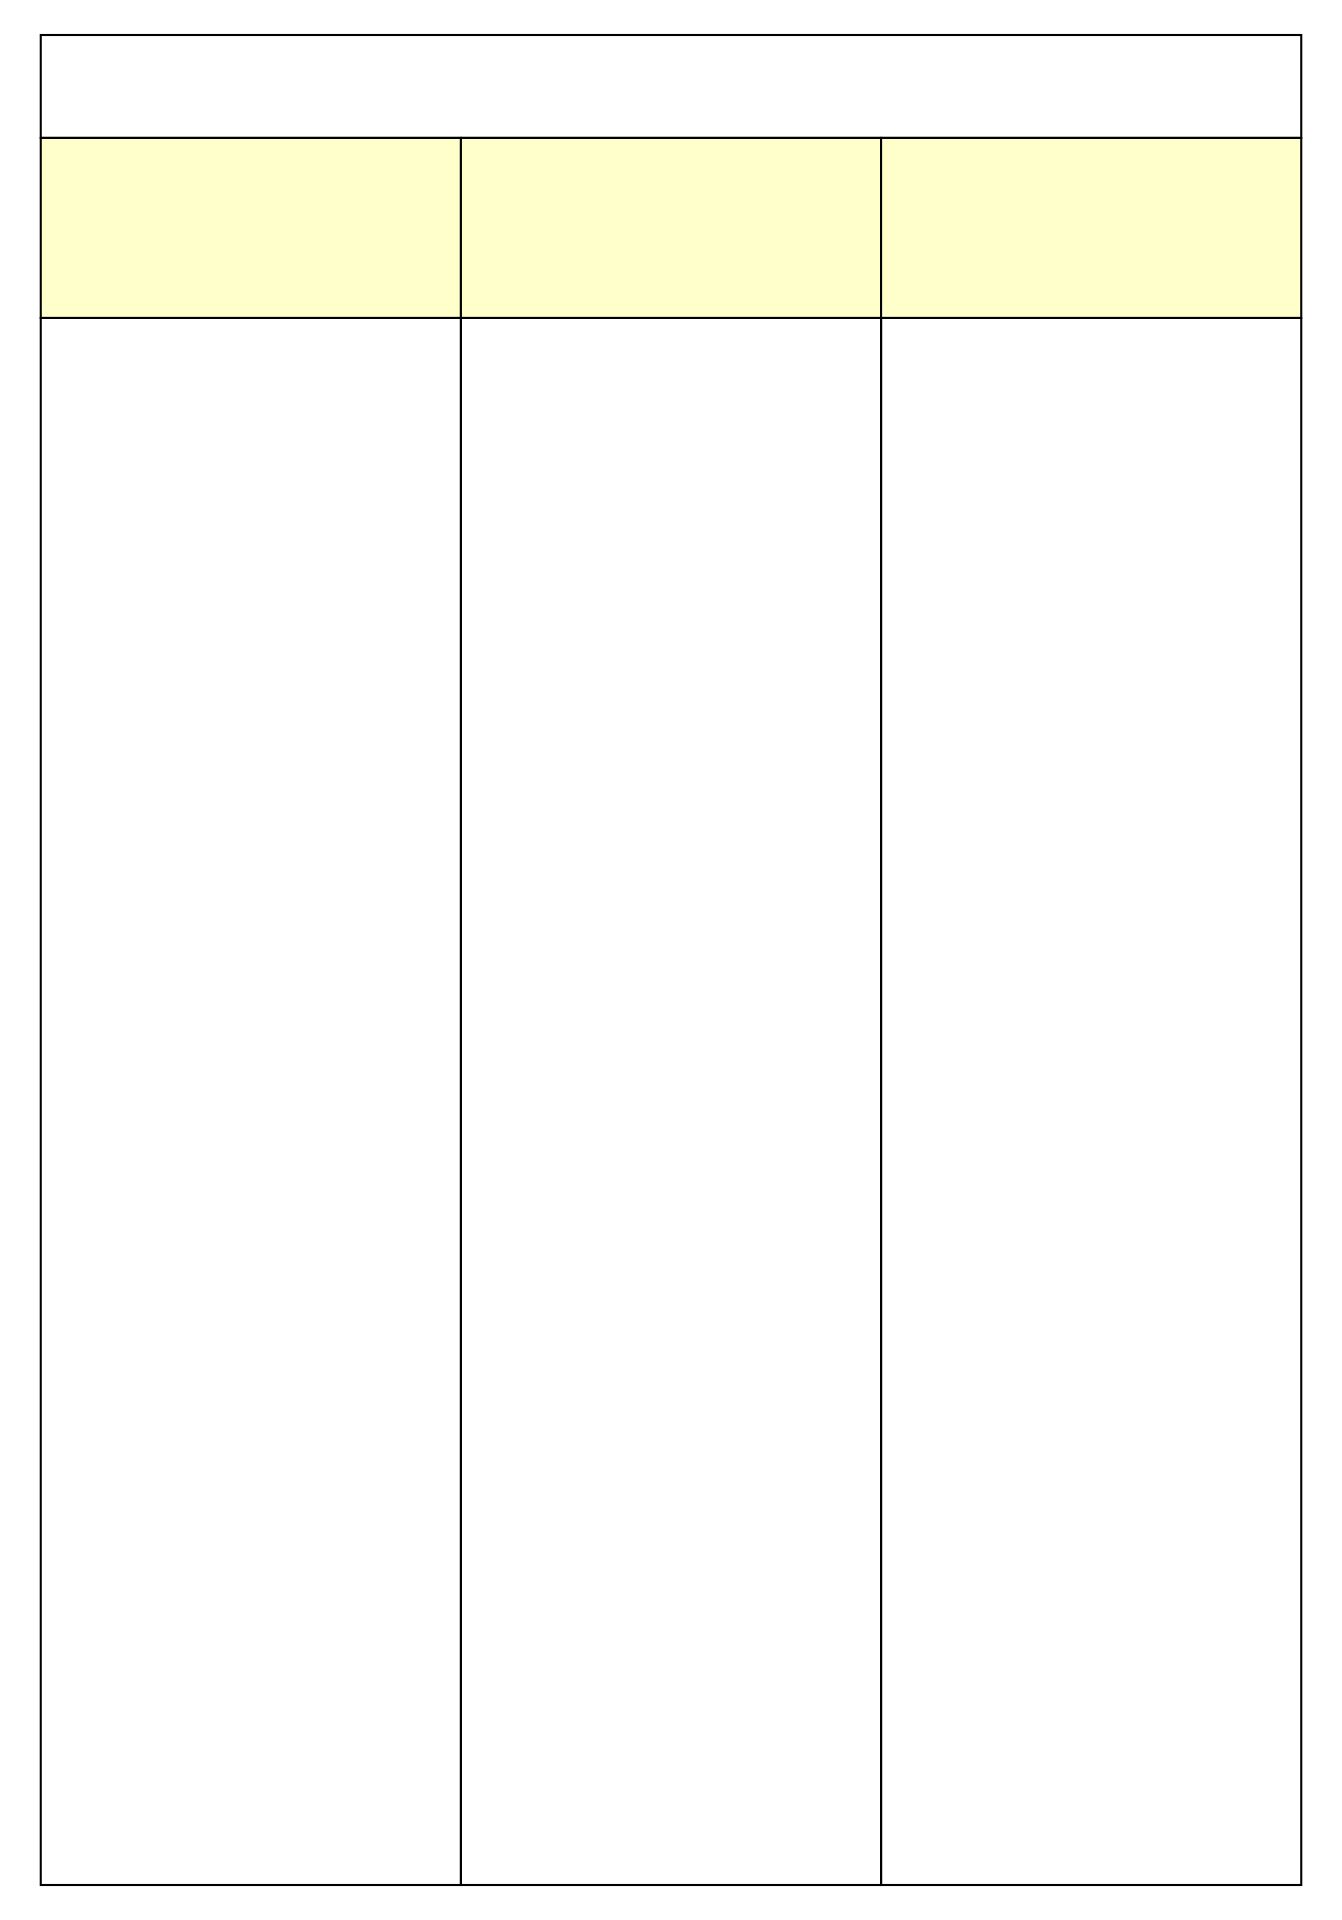 6-best-images-of-3-column-chart-printable-templates-three-column